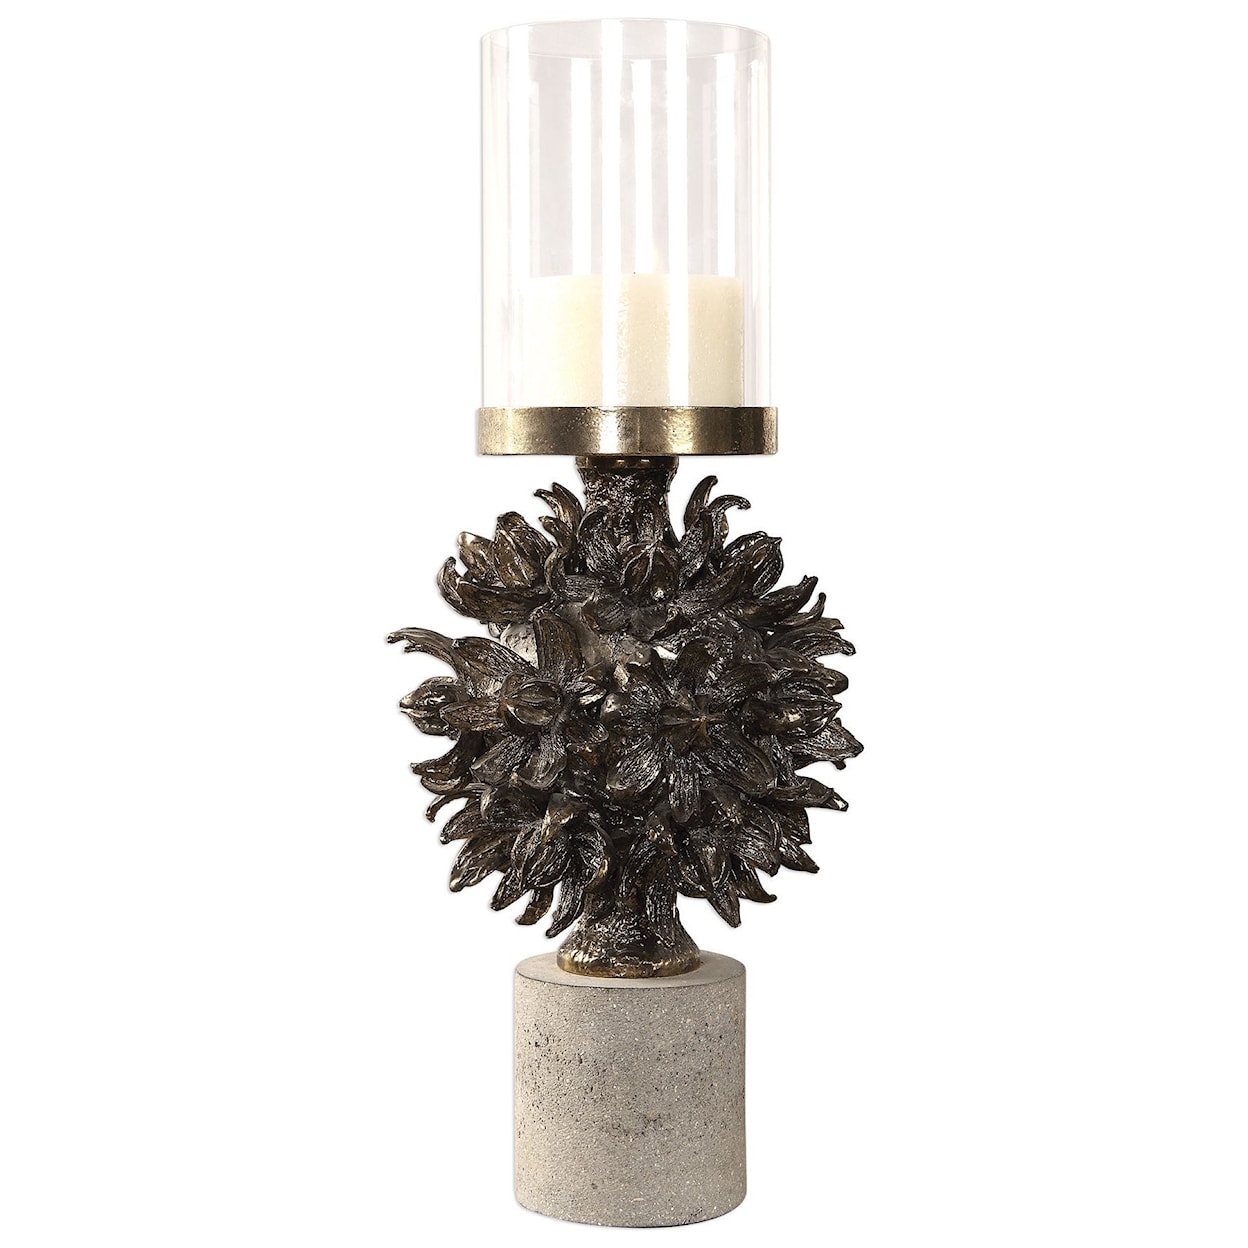 Uttermost Accessories - Candle Holders Autograph Tree Antique Bronze Cand